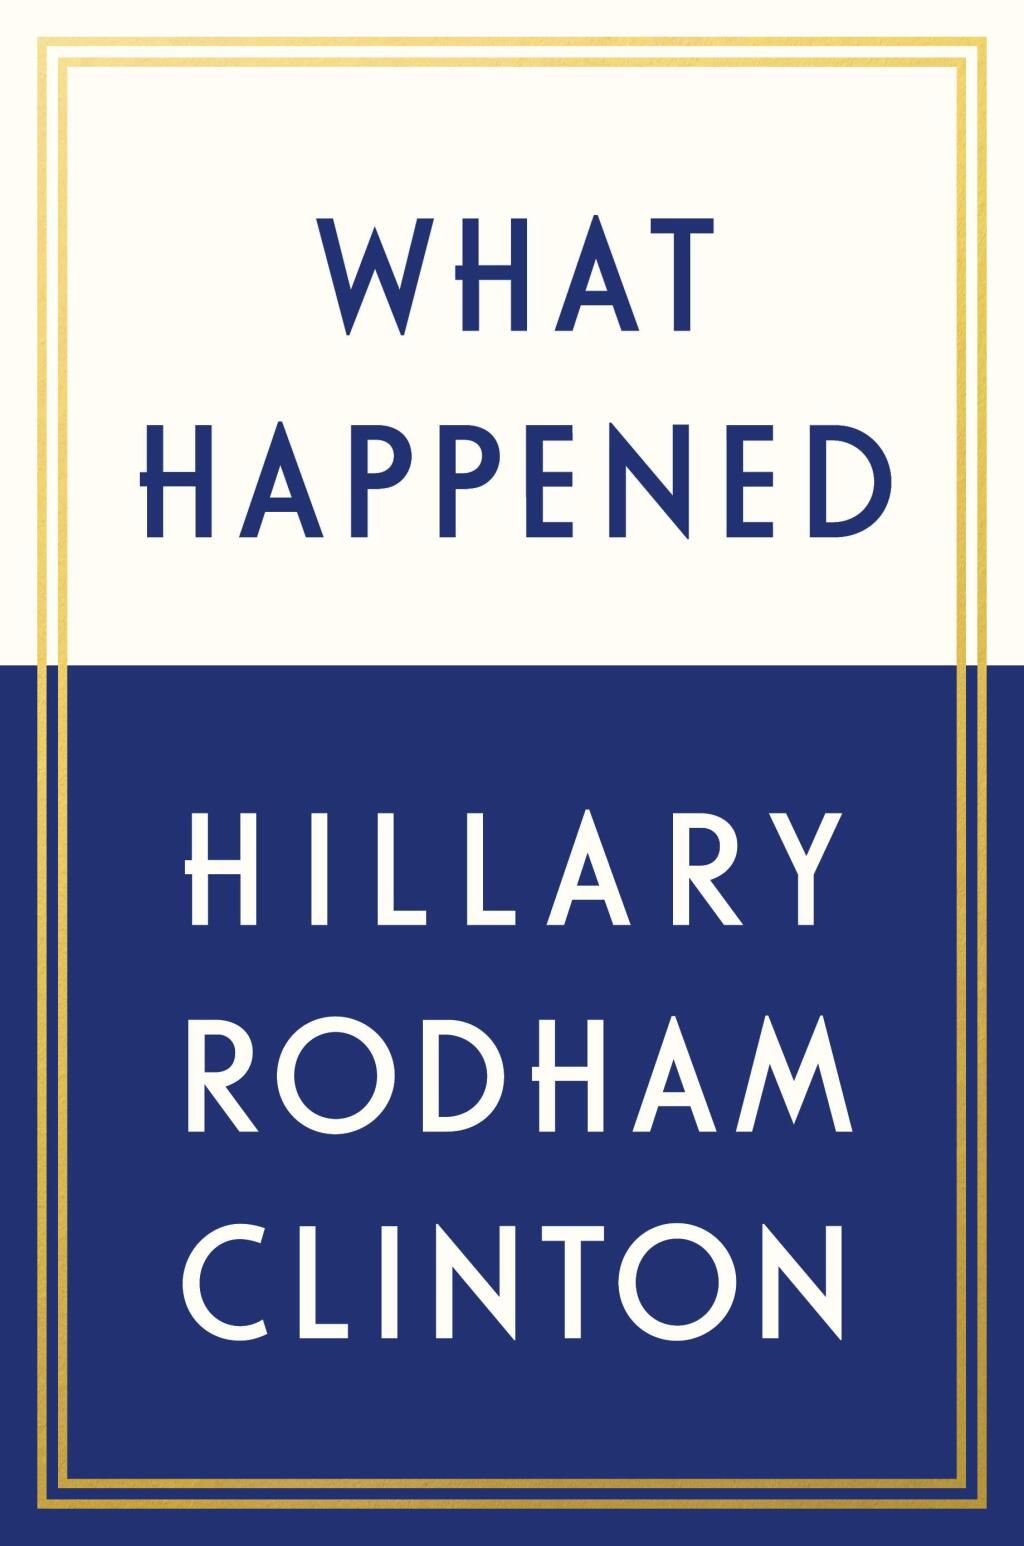 This book cover image released by Simon & Schuster shows 'What Happened,' by Hillary Rodham Clinton. (Simon & Schuster via AP)